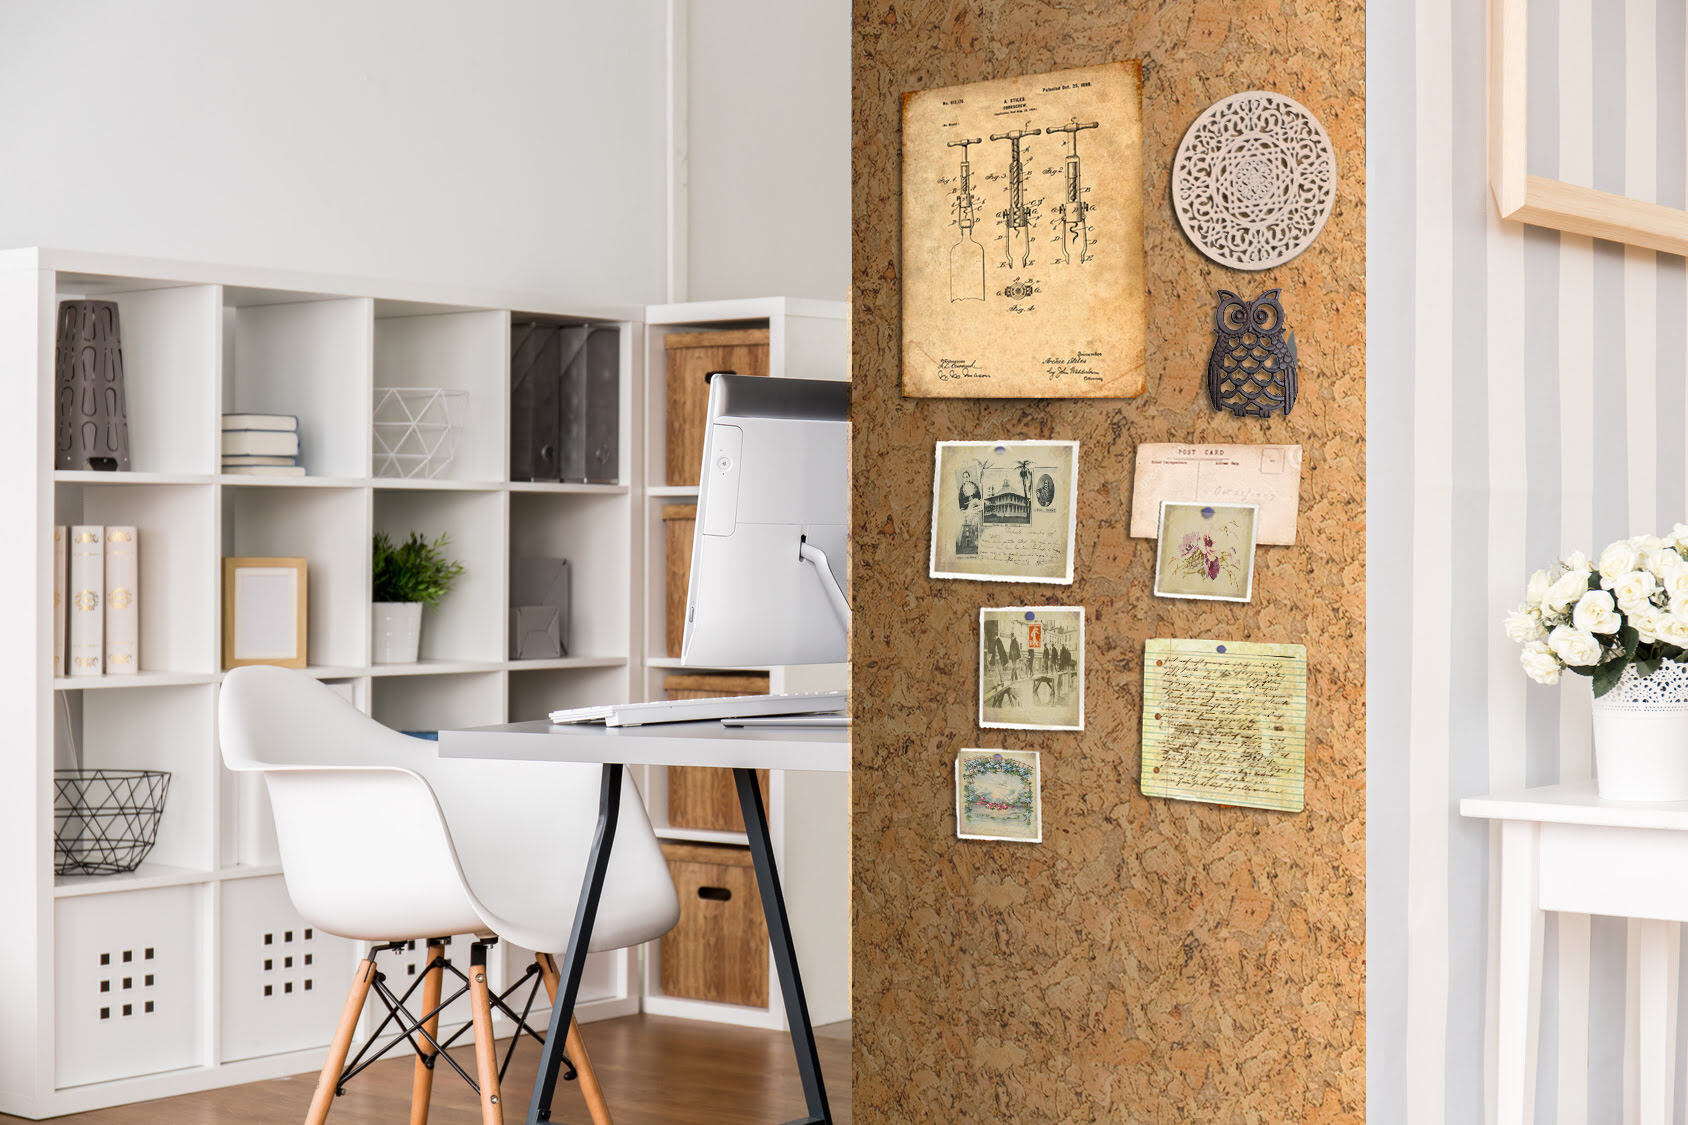 DIY Cork Wall Installation Guide For Beginners